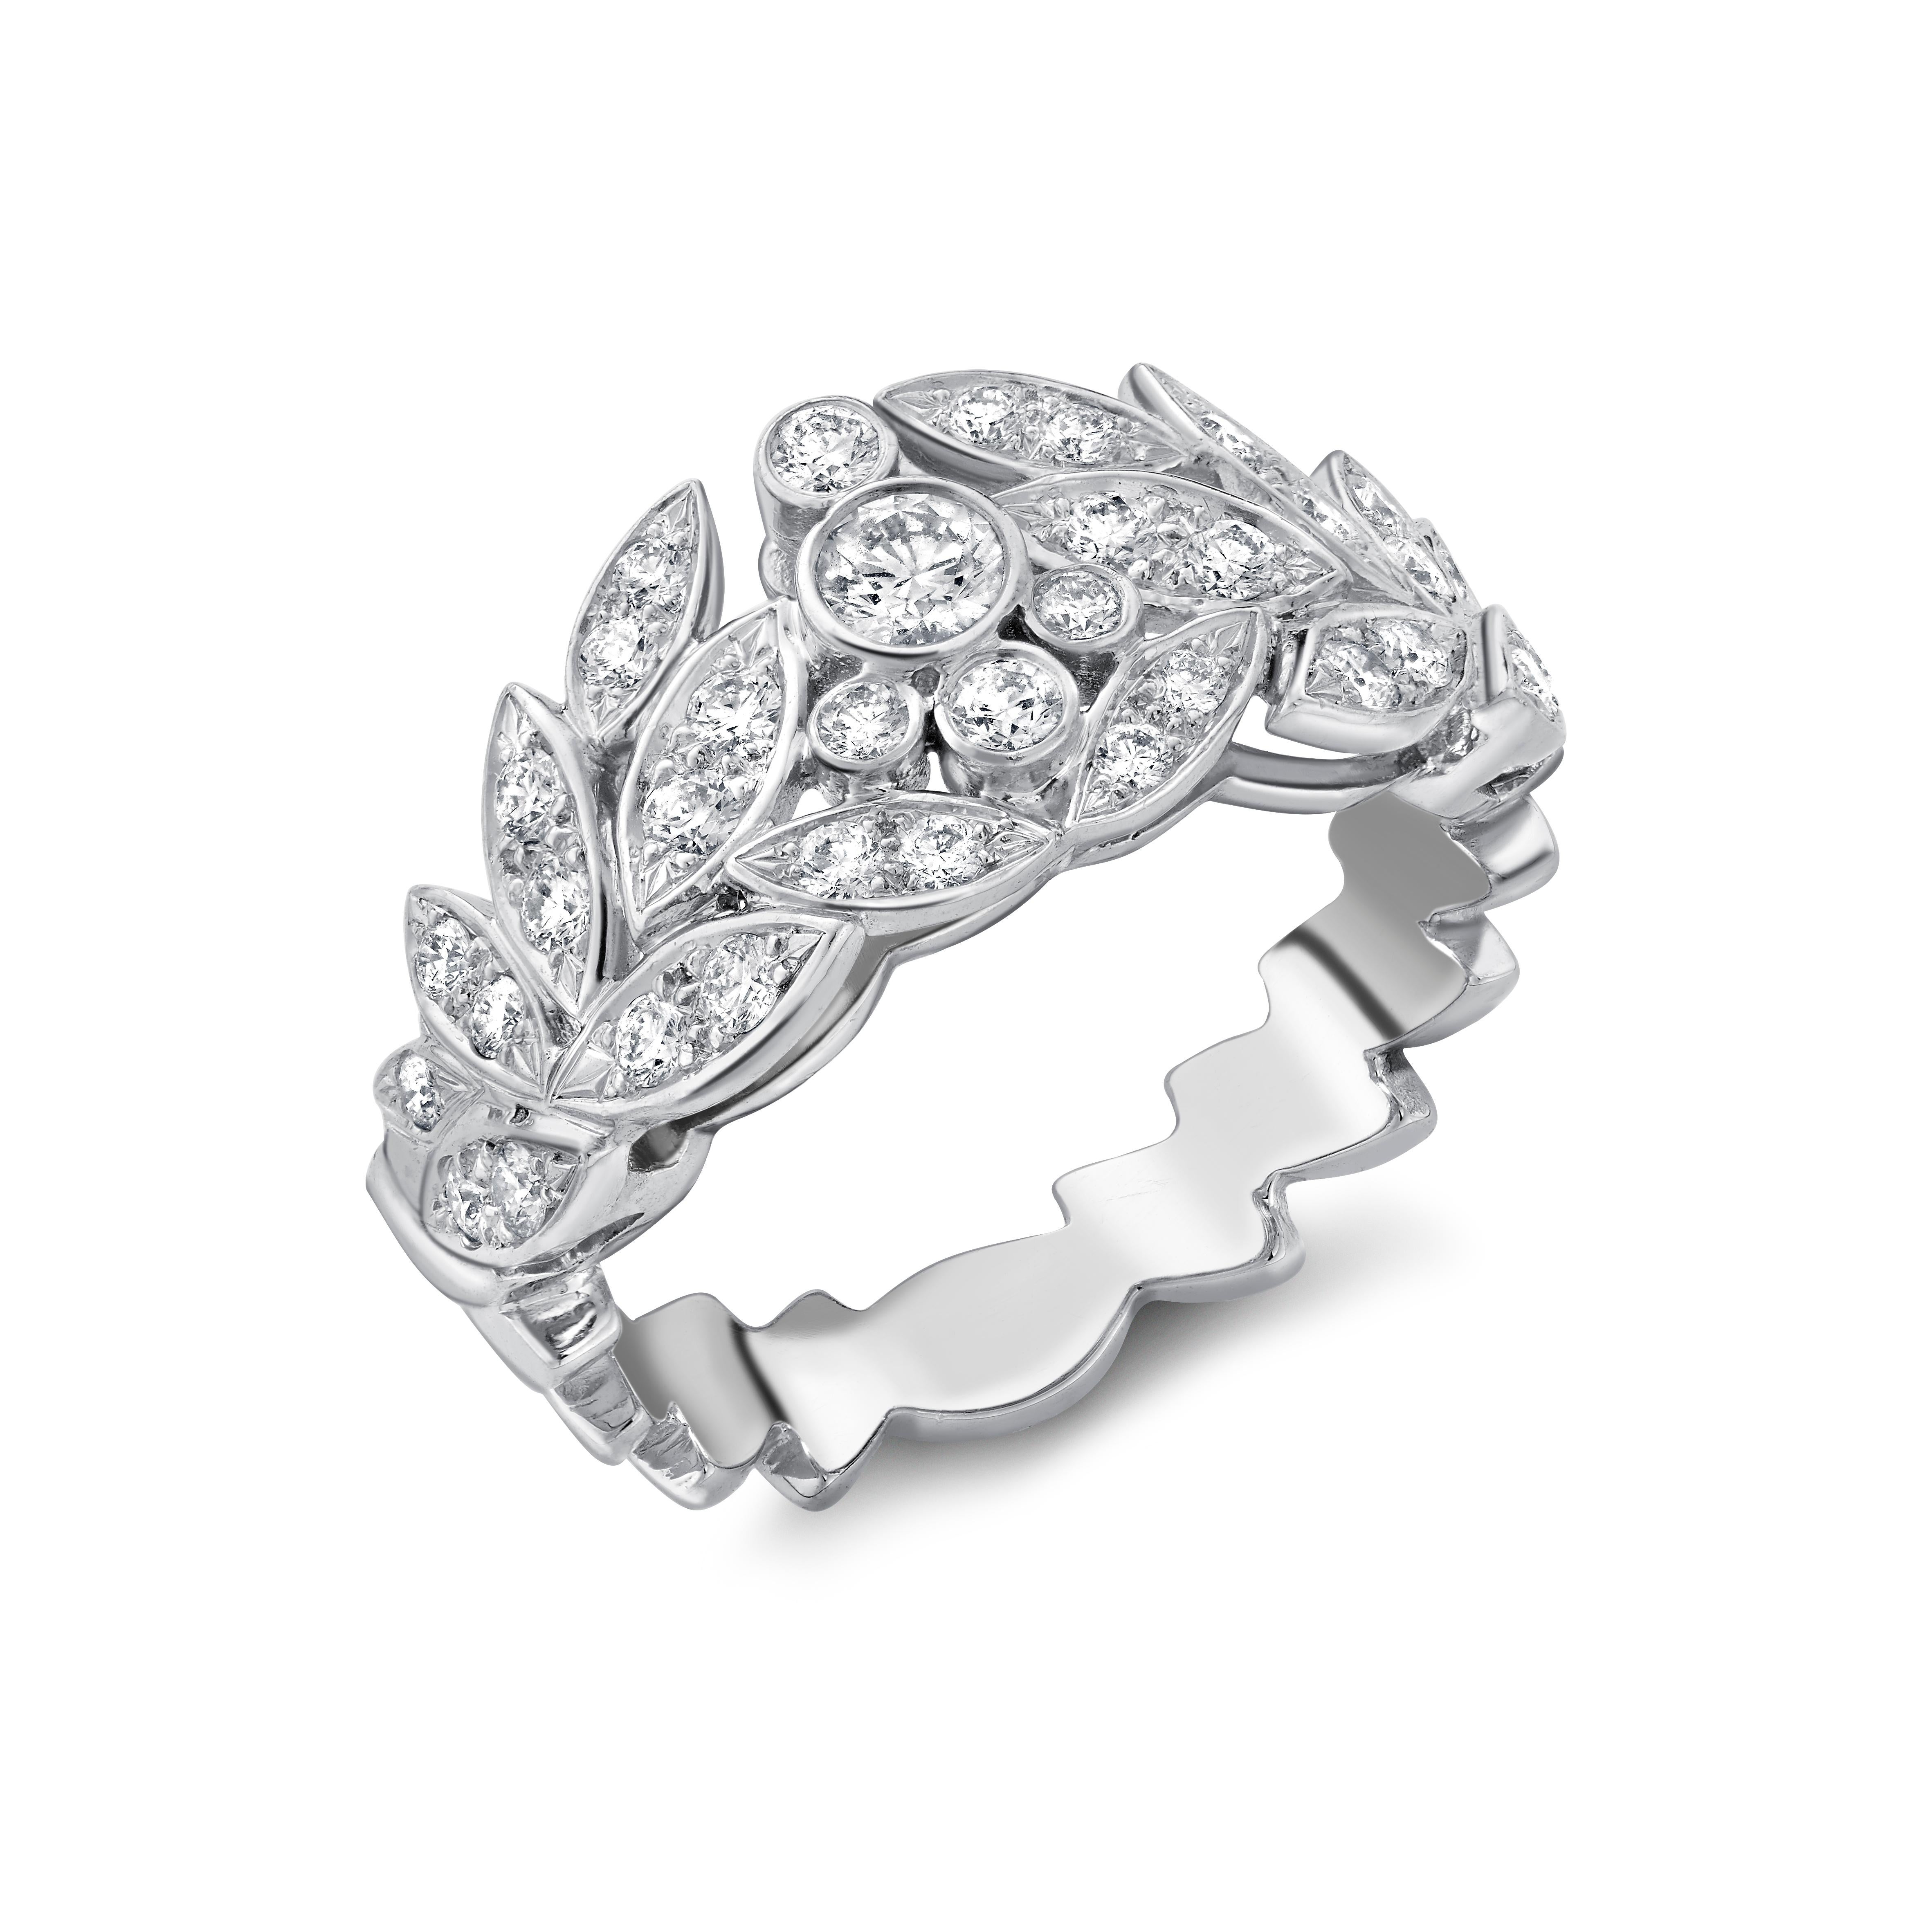 E Wolfe & Company Platinum Diamond-set Ring. The round brilliant cut diamonds have a total weight of .64 carats and are of G colour and VS clarity. The ring was handmade at our London Workshop during 2021 and it weighs 8.68 grams. Currently the ring